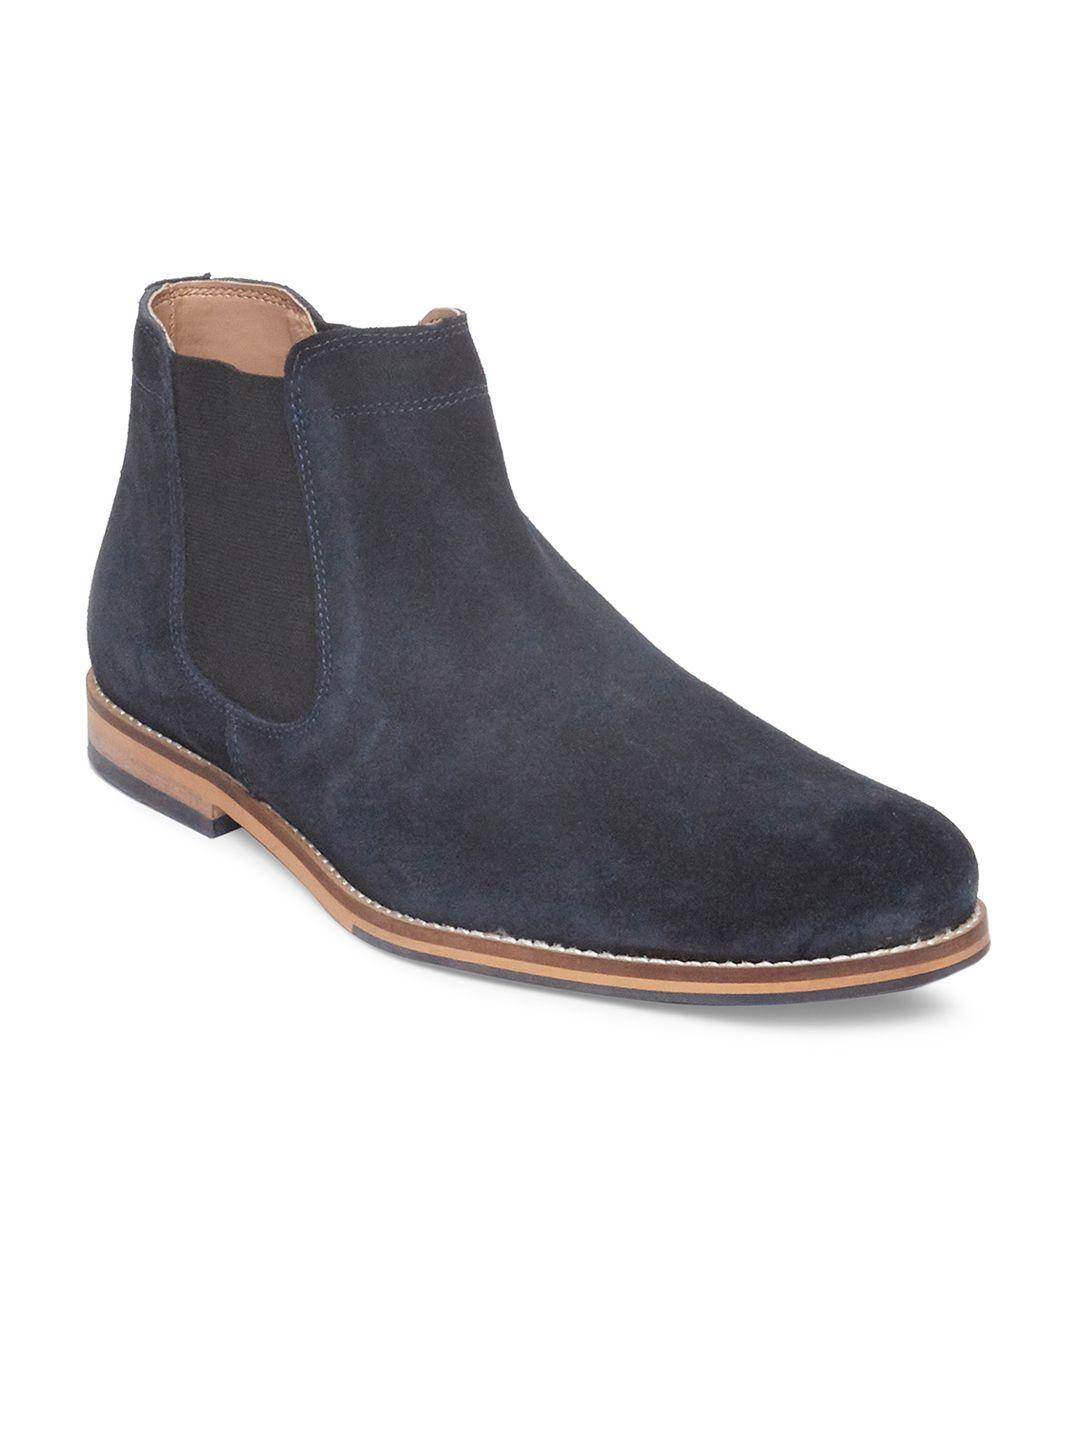 hats-off-accessories-men-navy-blue-woven-design-suede-leather-chelsea-boots